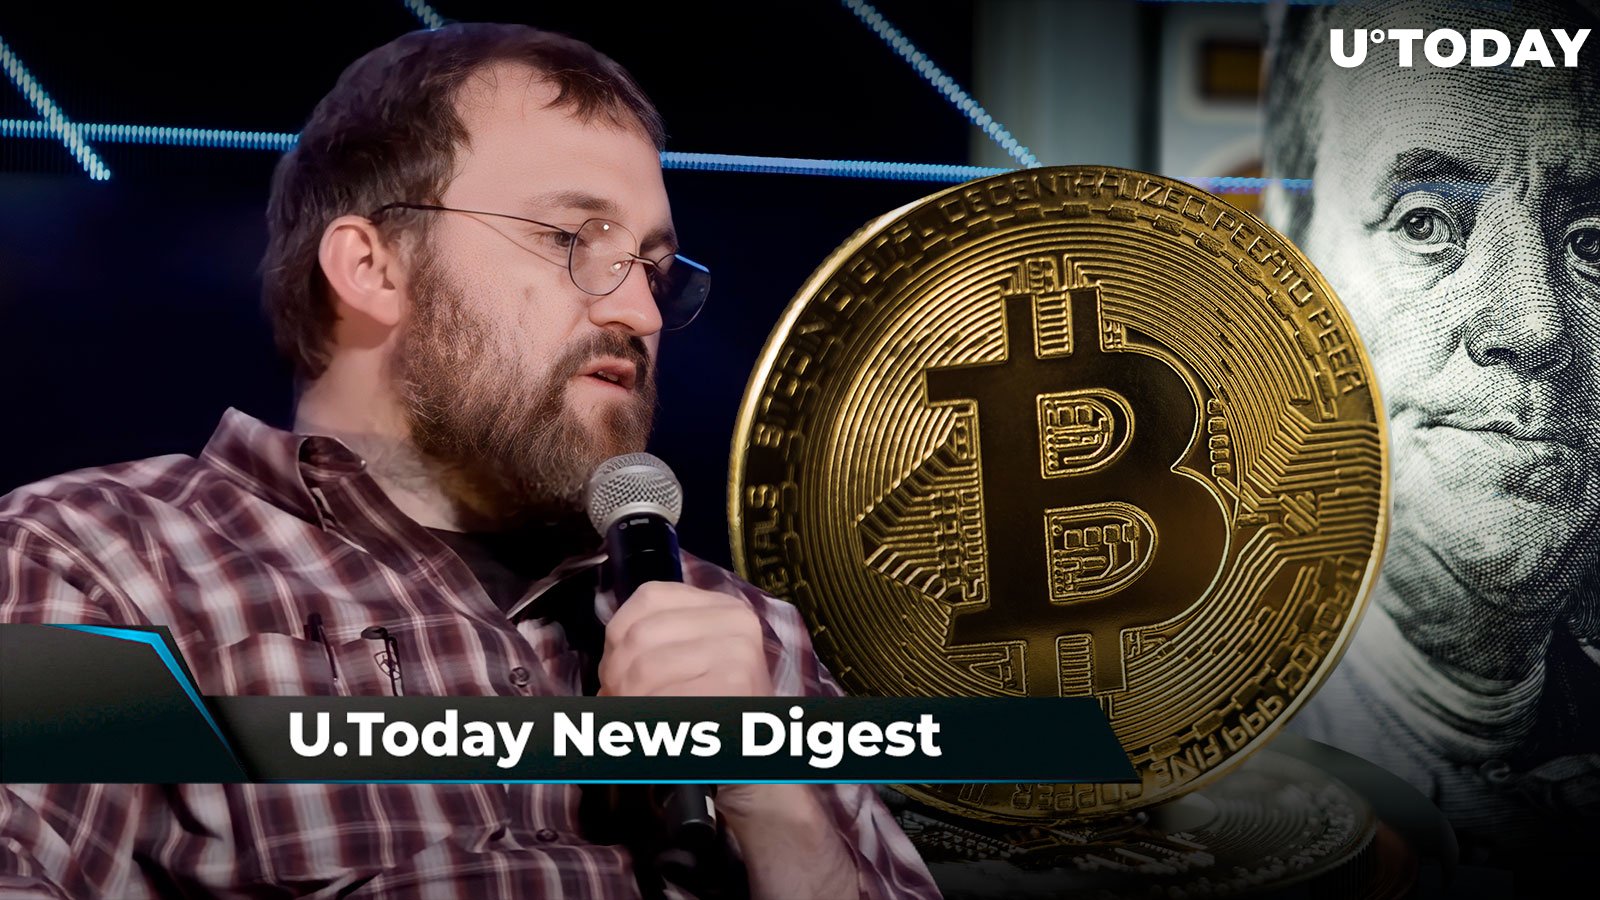 Cardano Founder Comments on Market Crash, SHIB Slips in Rankings, Three Reasons Why BTC Is at $20,000: Crypto News Digest by U.Today